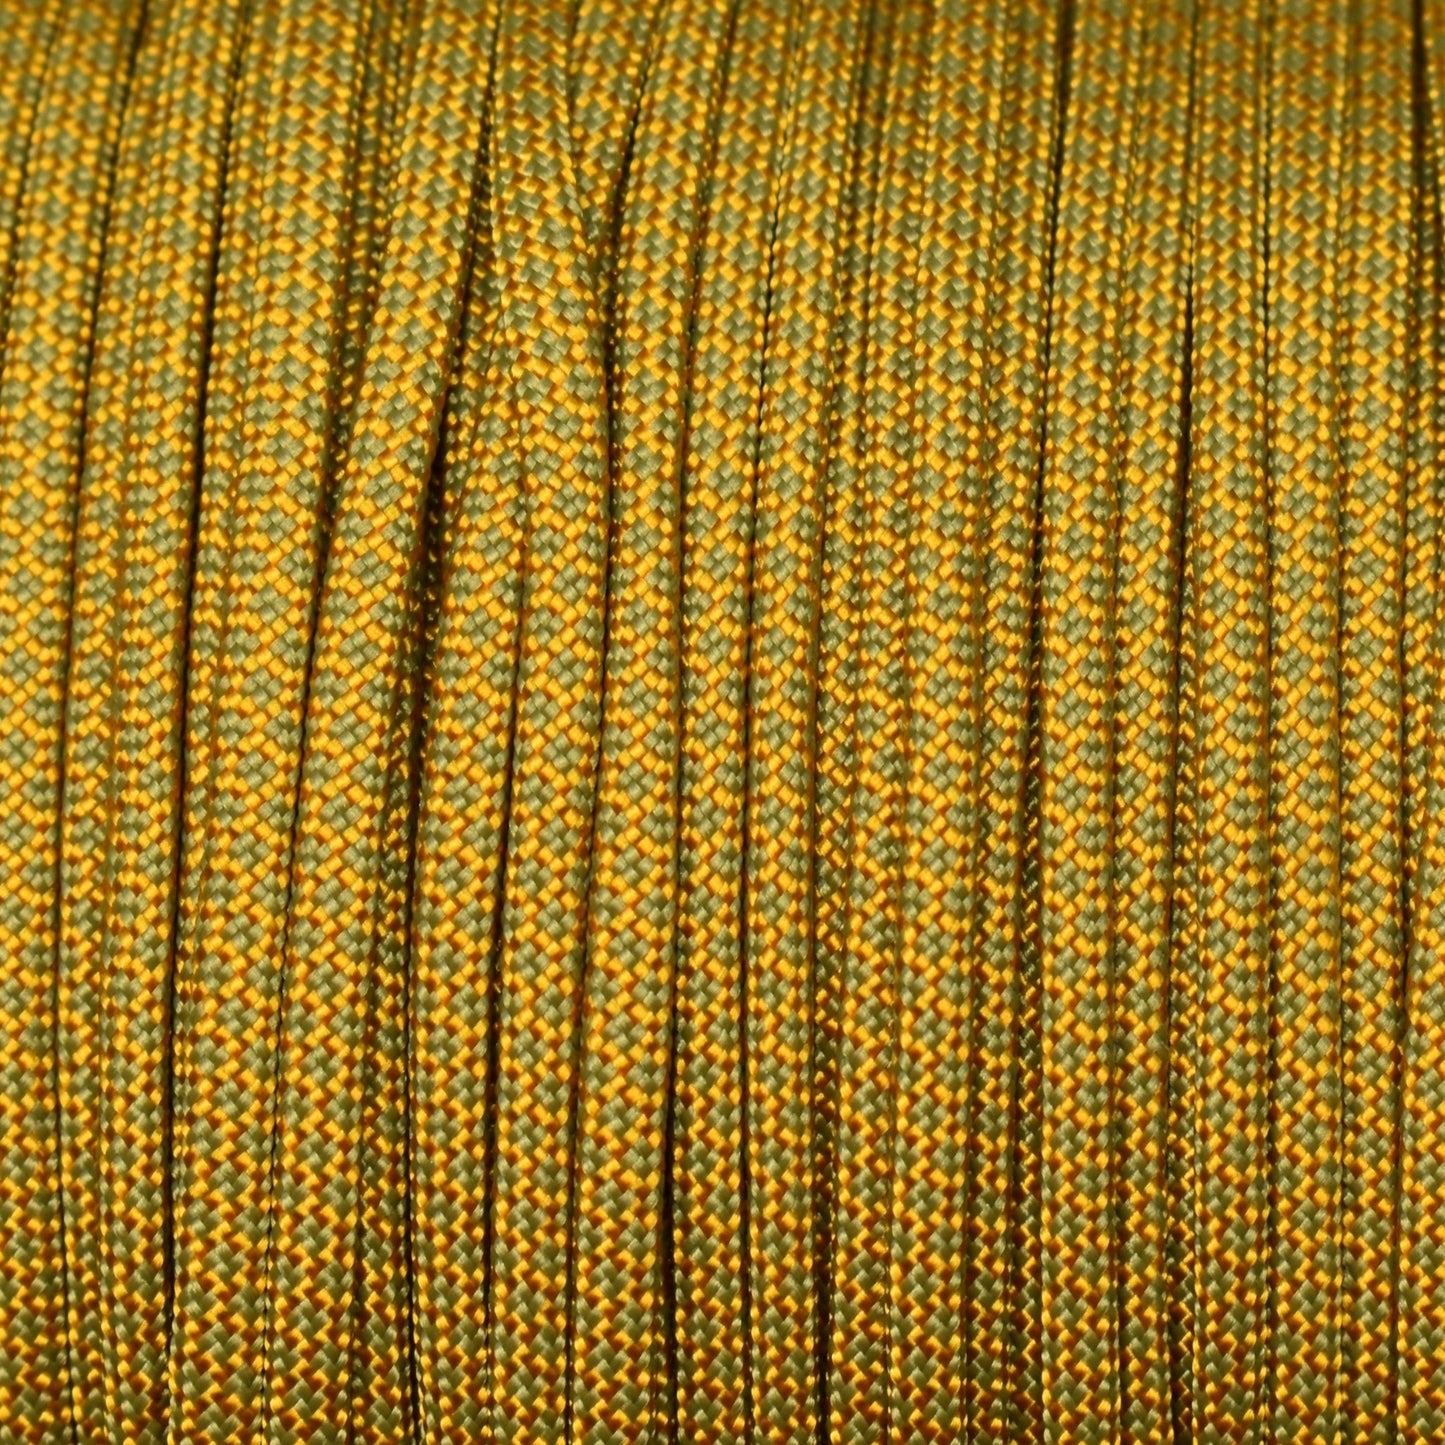 550 Paracord Goldenrod with Moss Diamonds Made in the USA Nylon/Nylon (1000 FT.) - Paracord Galaxy